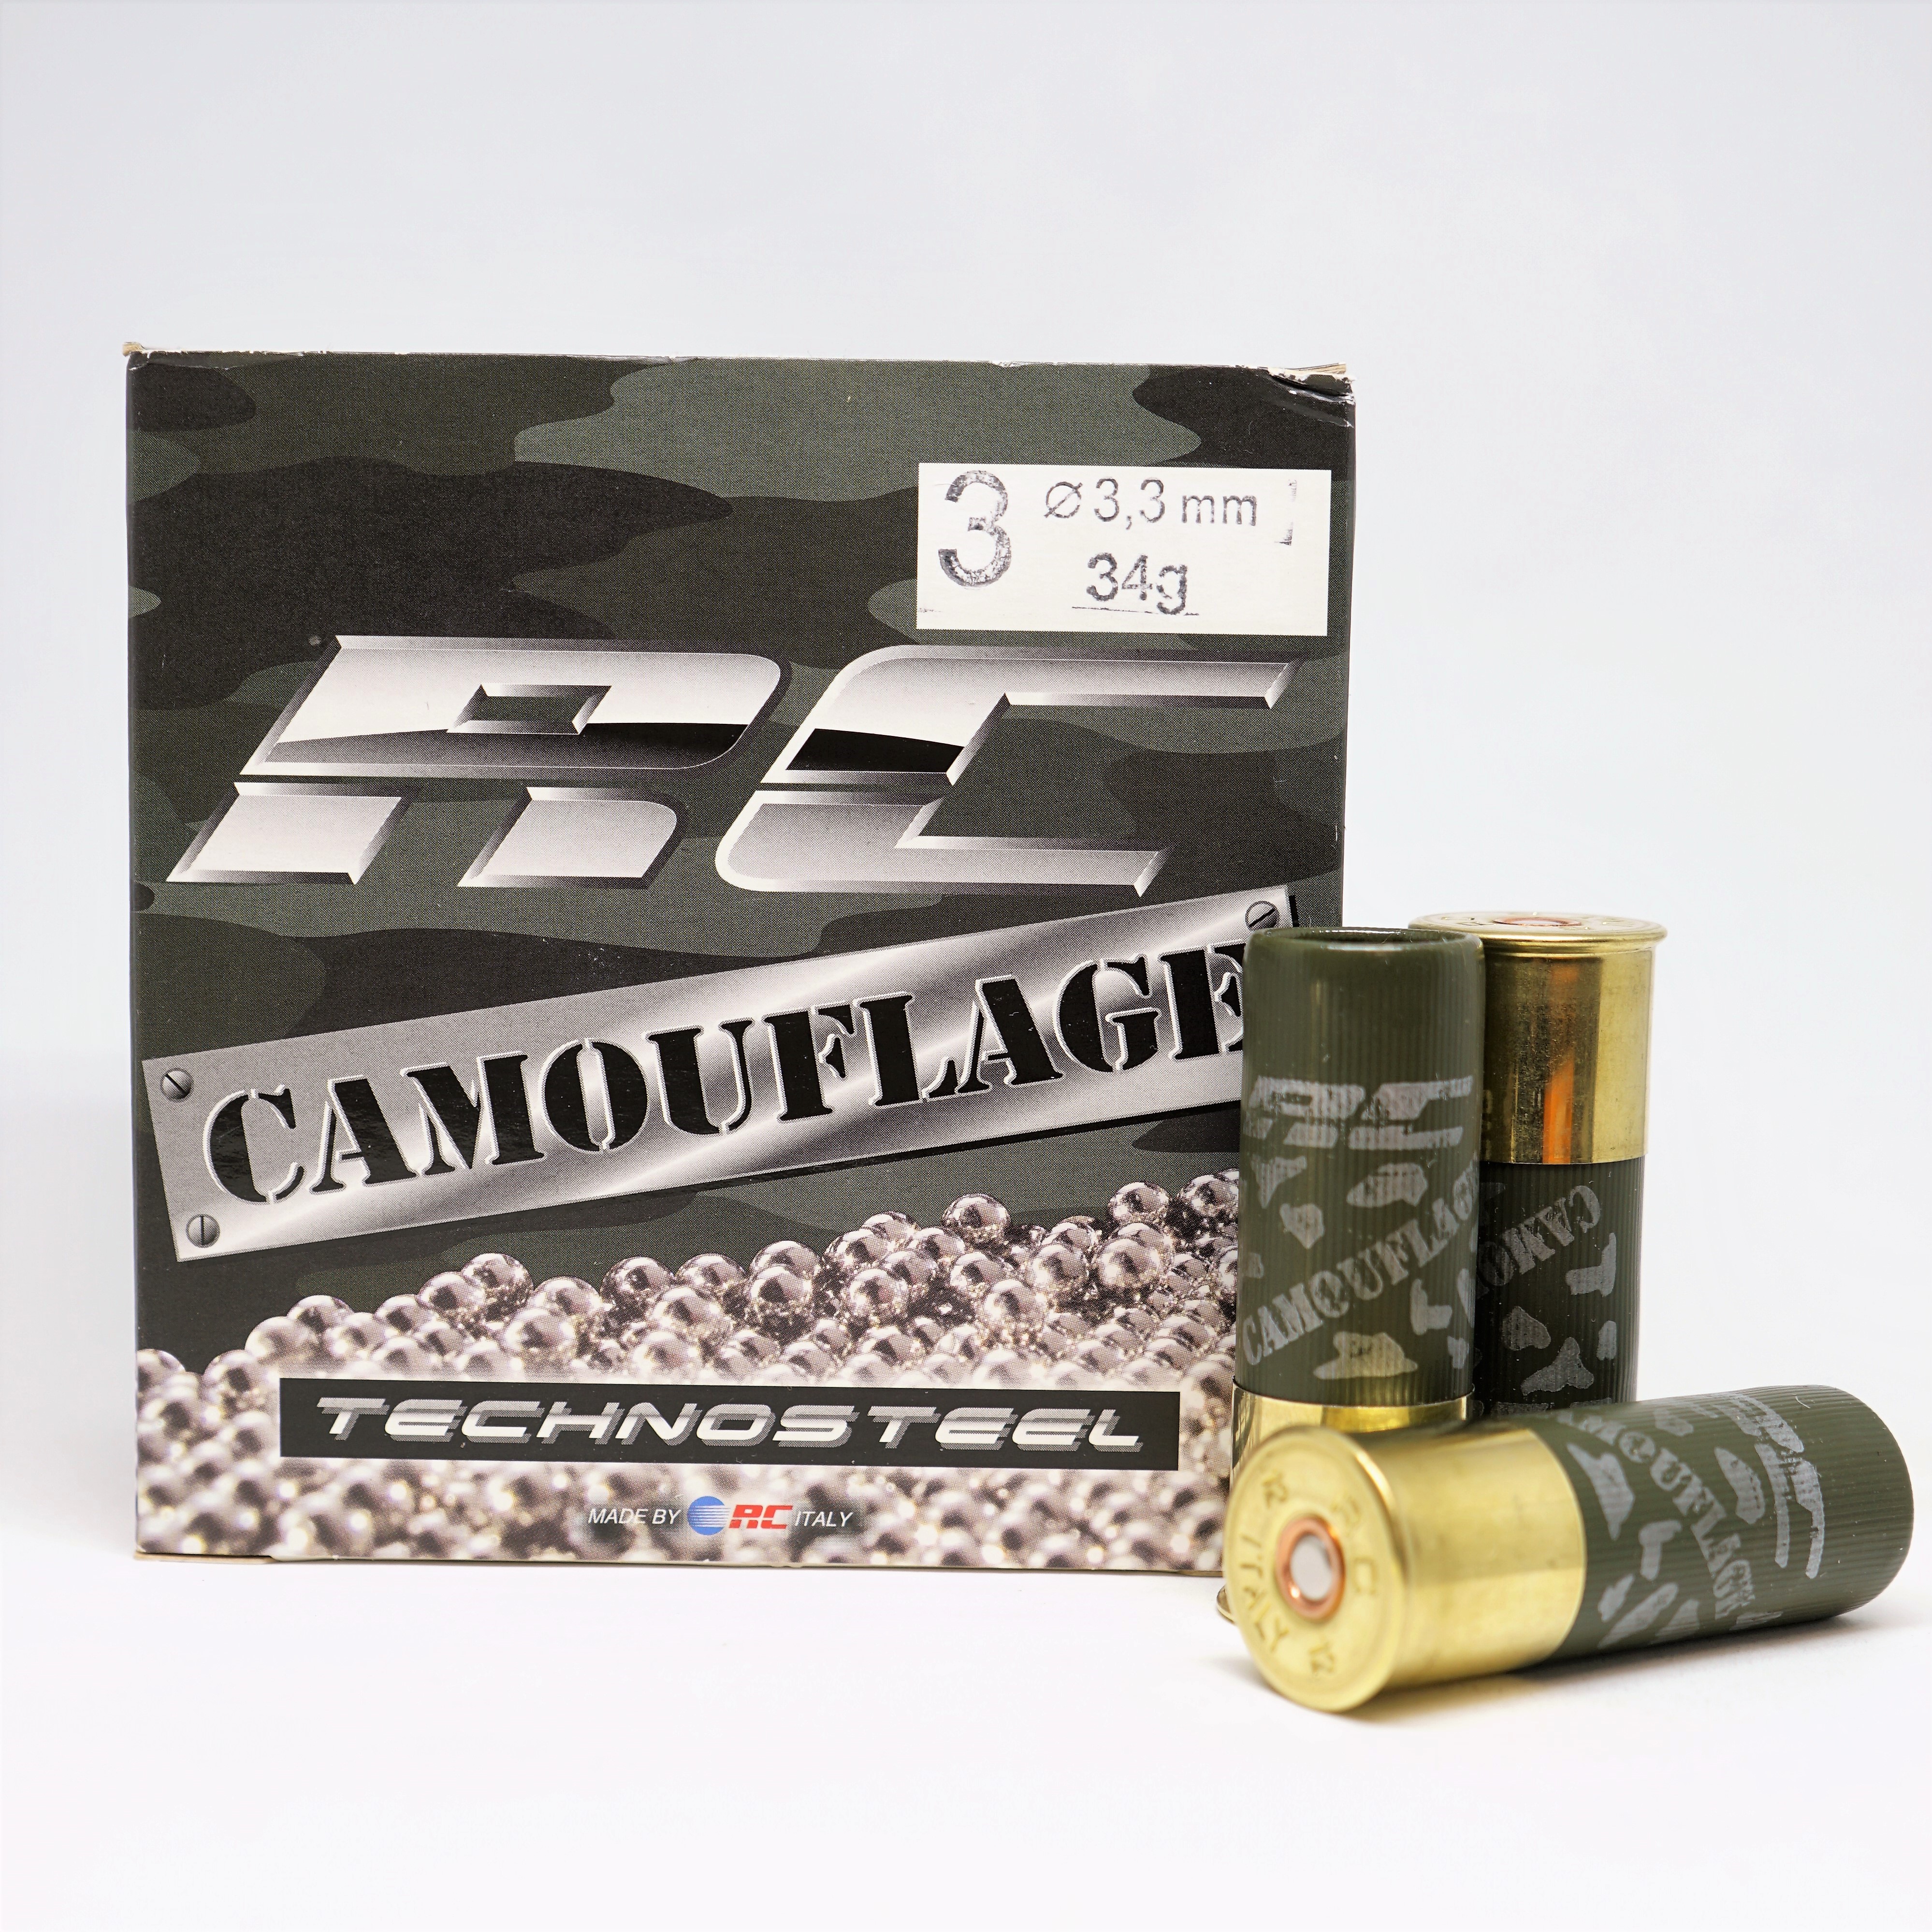 RC Camouflage Technosteel 12/70 34g Nro 3 3,3mm 25klp/rs